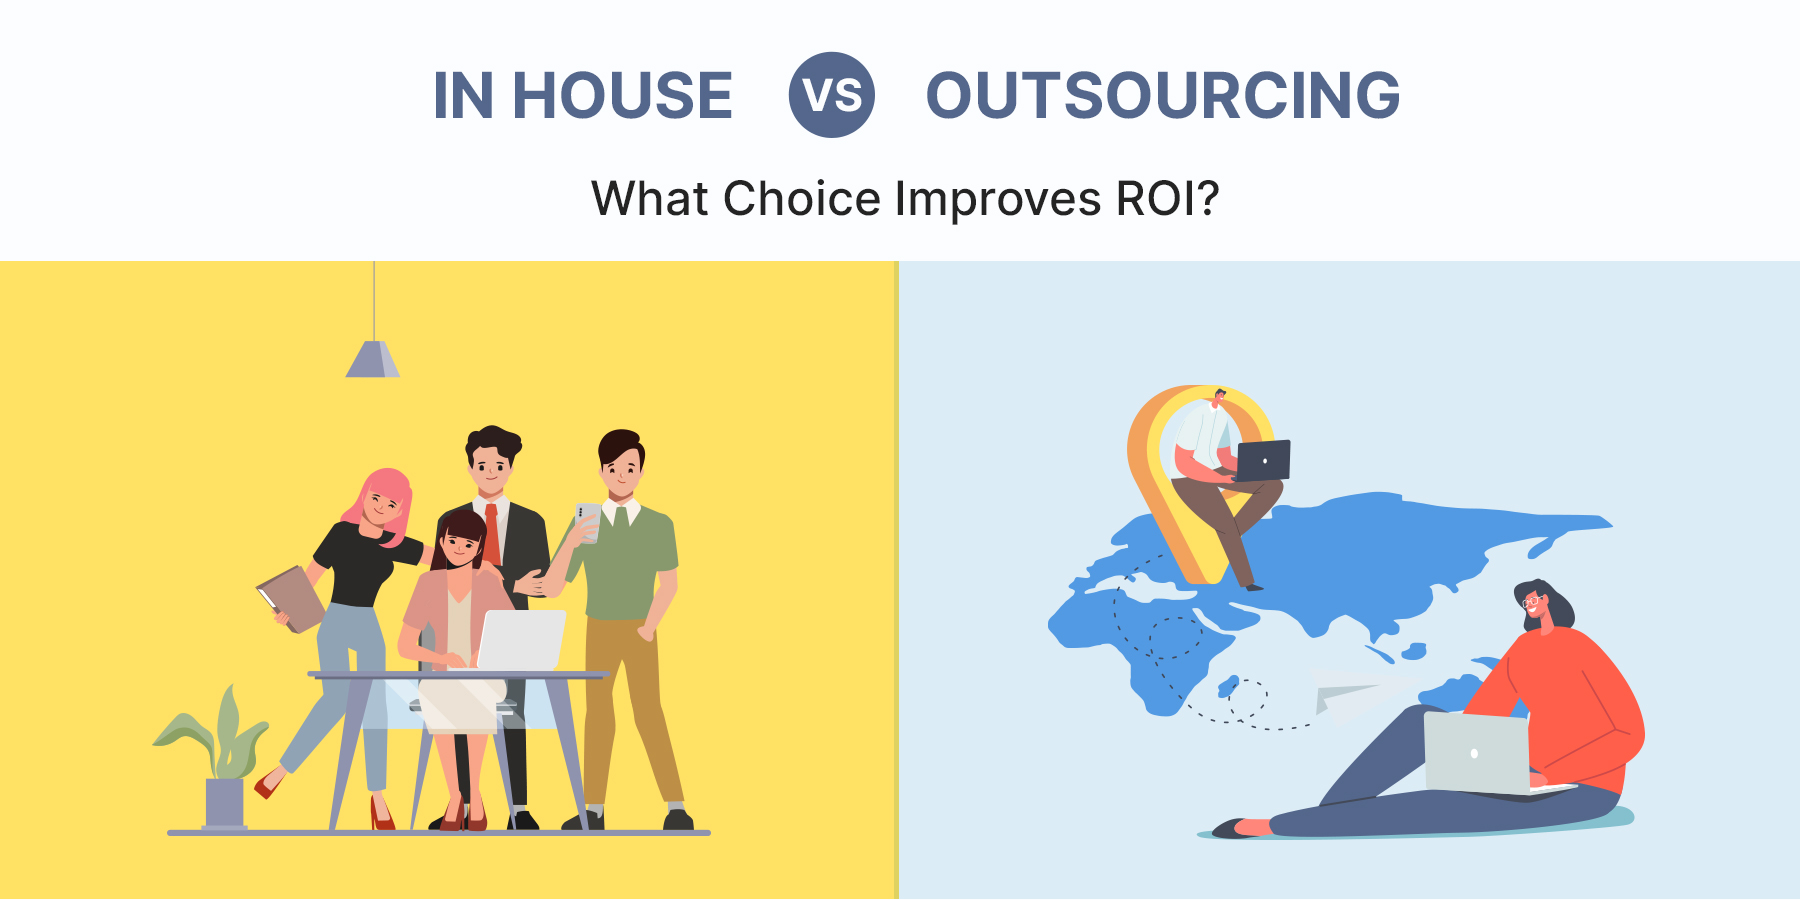 In House Vs Outsourcing Lead Generation